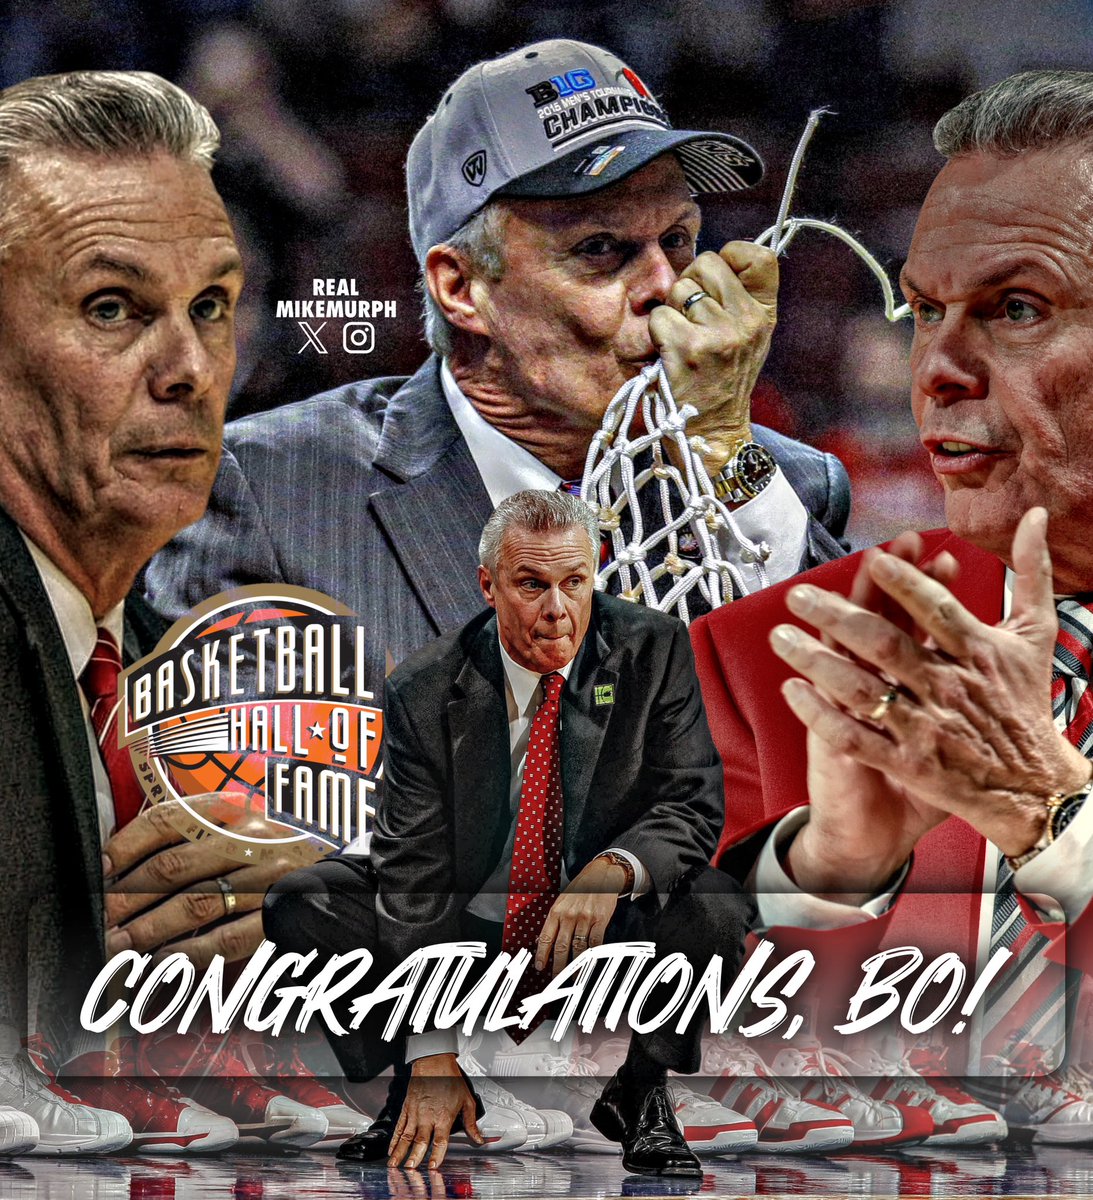 Congratulations to Bo Ryan for being inducted into the @NaismithTrophy @Hoophall Hall of Fame🏀🏆 Thank you for all of the unforgettable moments, and the STANDARD you set for Wisconsin basketball. #Legend